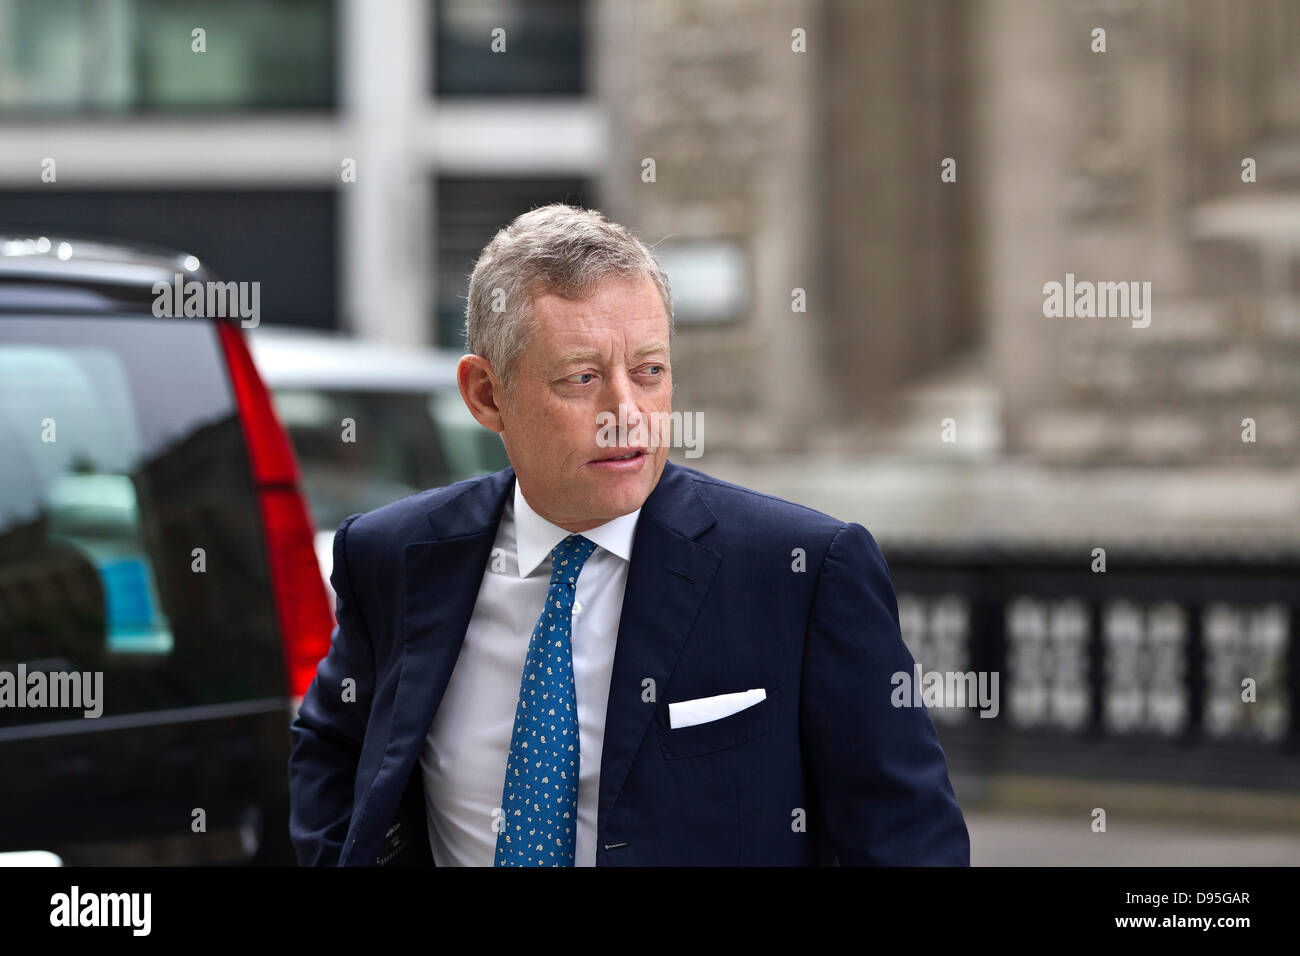 Rolls Building, London, UK. 12th June, 2013.  Picture shows Alexander Vik arriving at the Rolls Building, London where he suing Deutsche Bank over $8 Billion fund losses dating back to 2008. Stock Photo